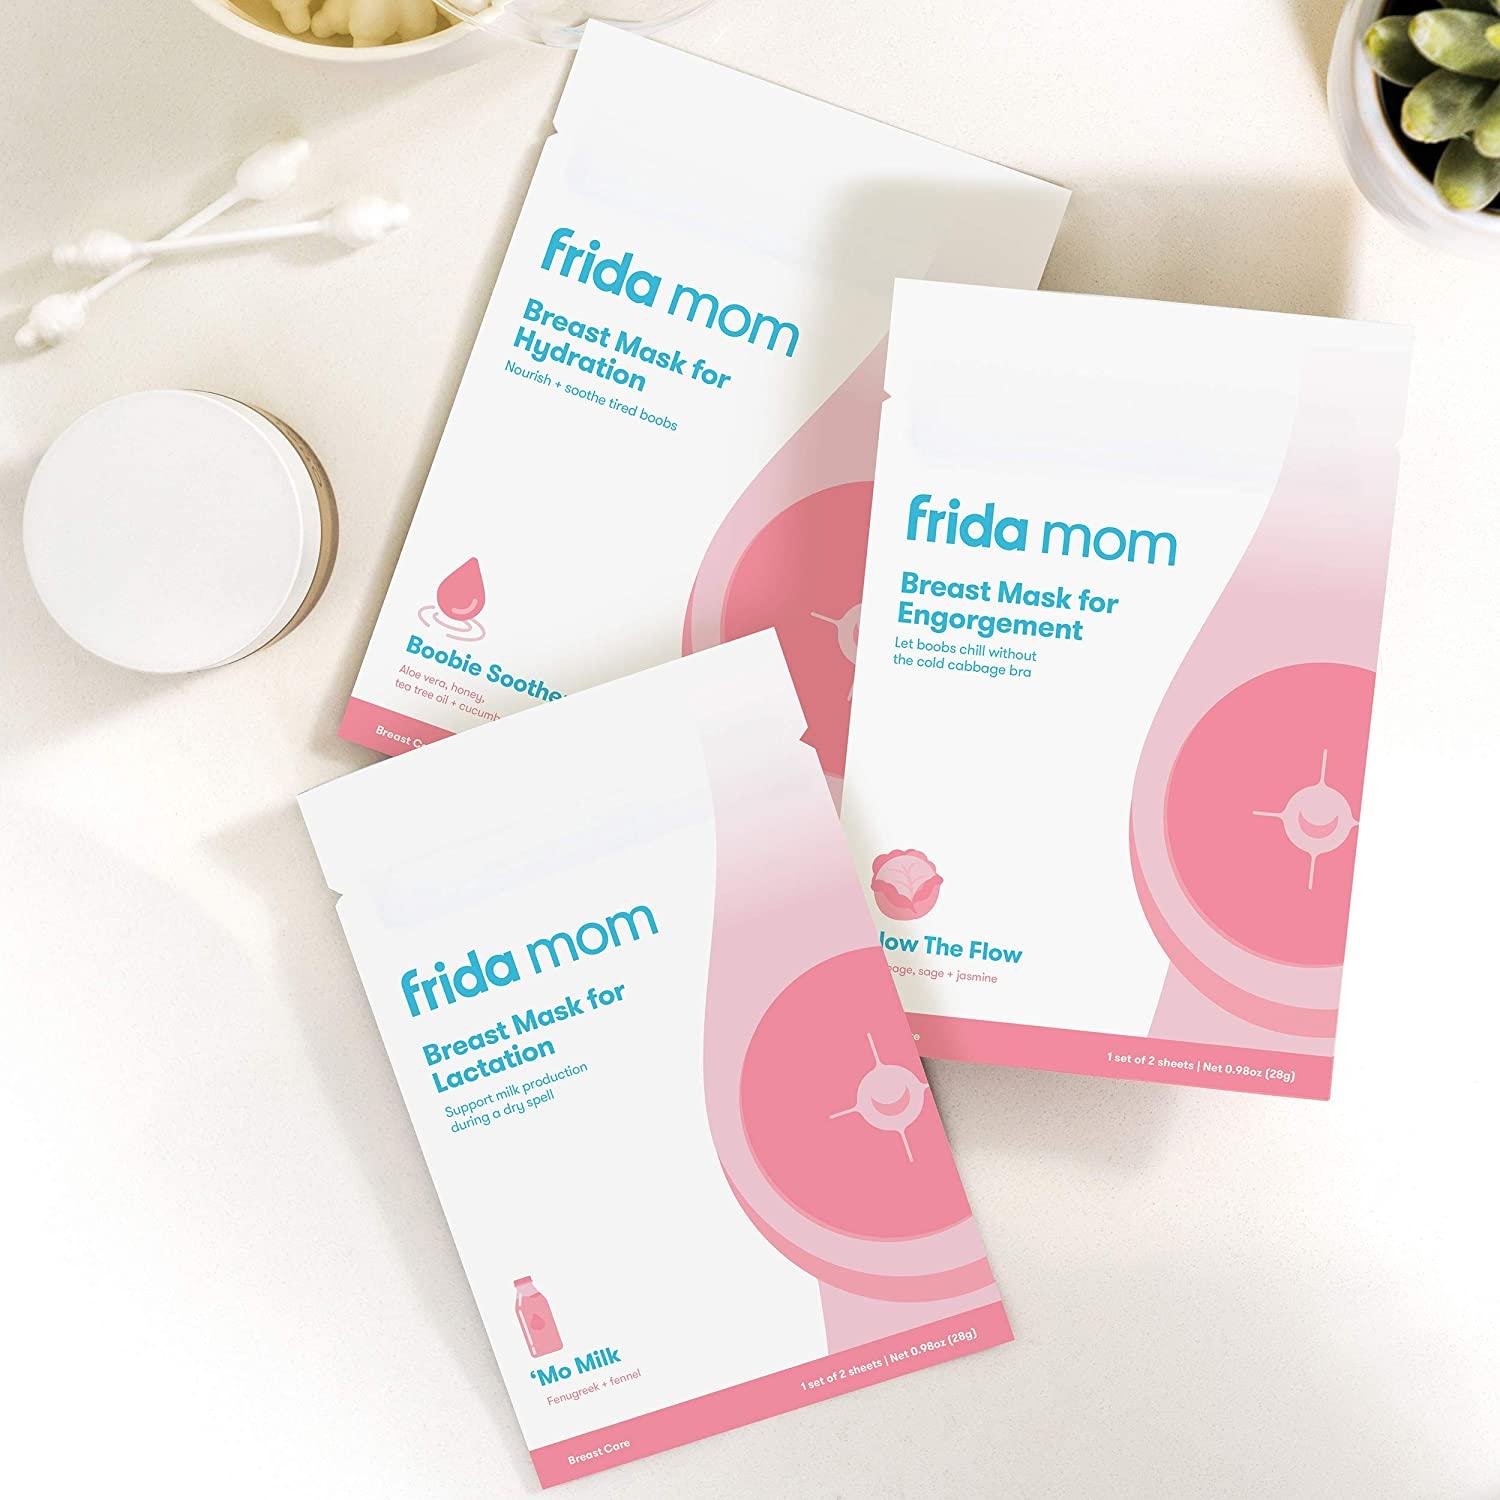 Frida Mom 2-in-1 Lactation Massager, Breastfeeding Supplement with